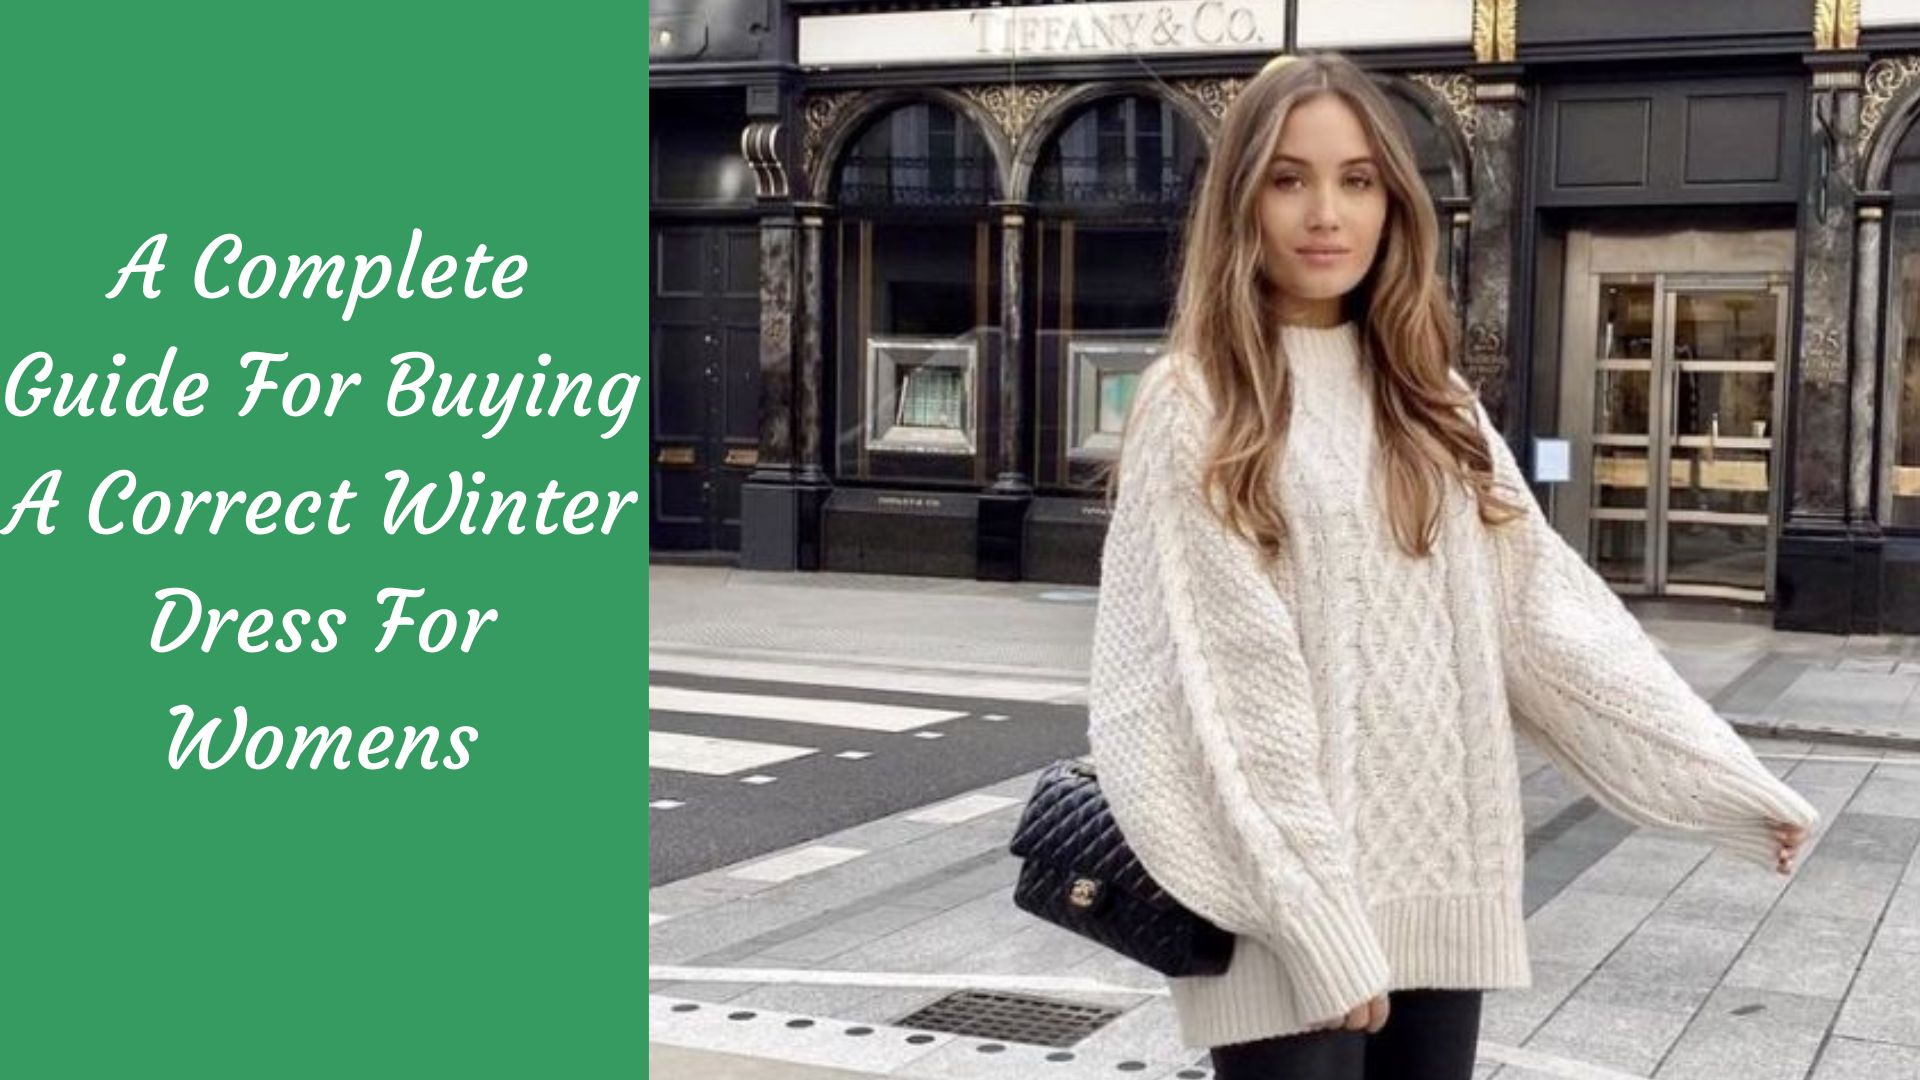 Winter outfit ideas that will keep you stylish and toasty